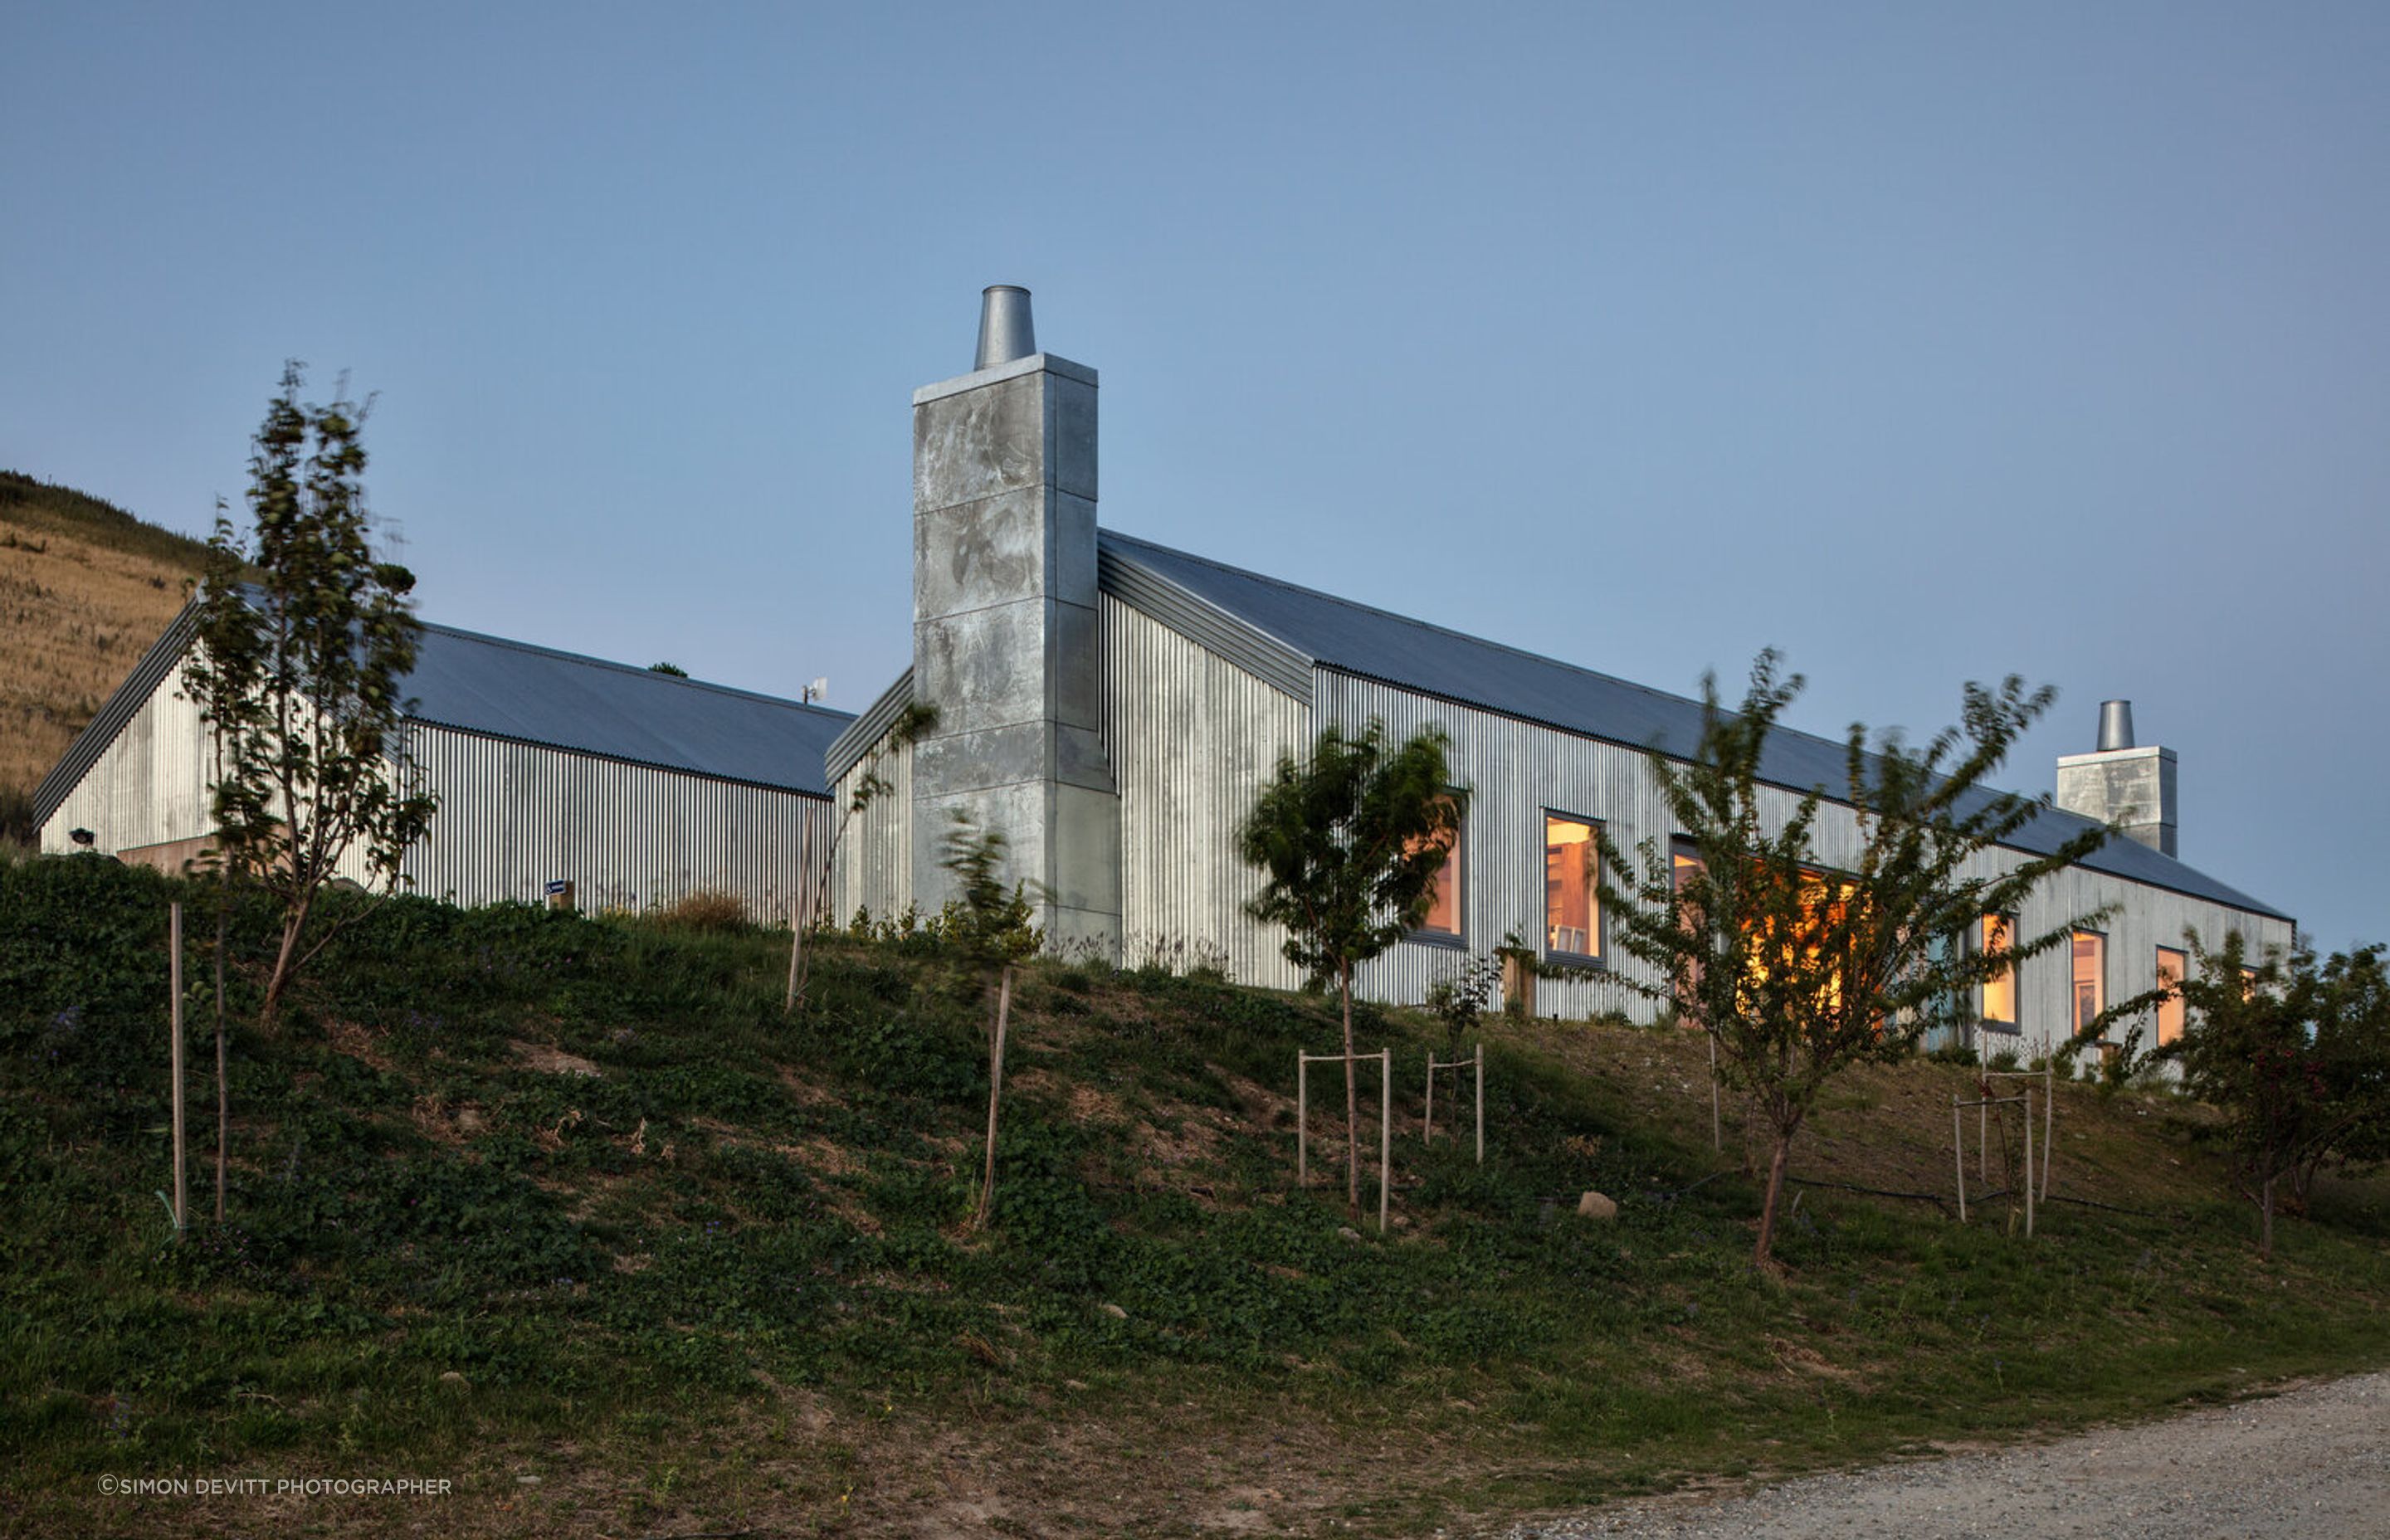 At each end of the wine-tasting building sits a fireplace with a chimney wrapped in acid-washed sheet iron.